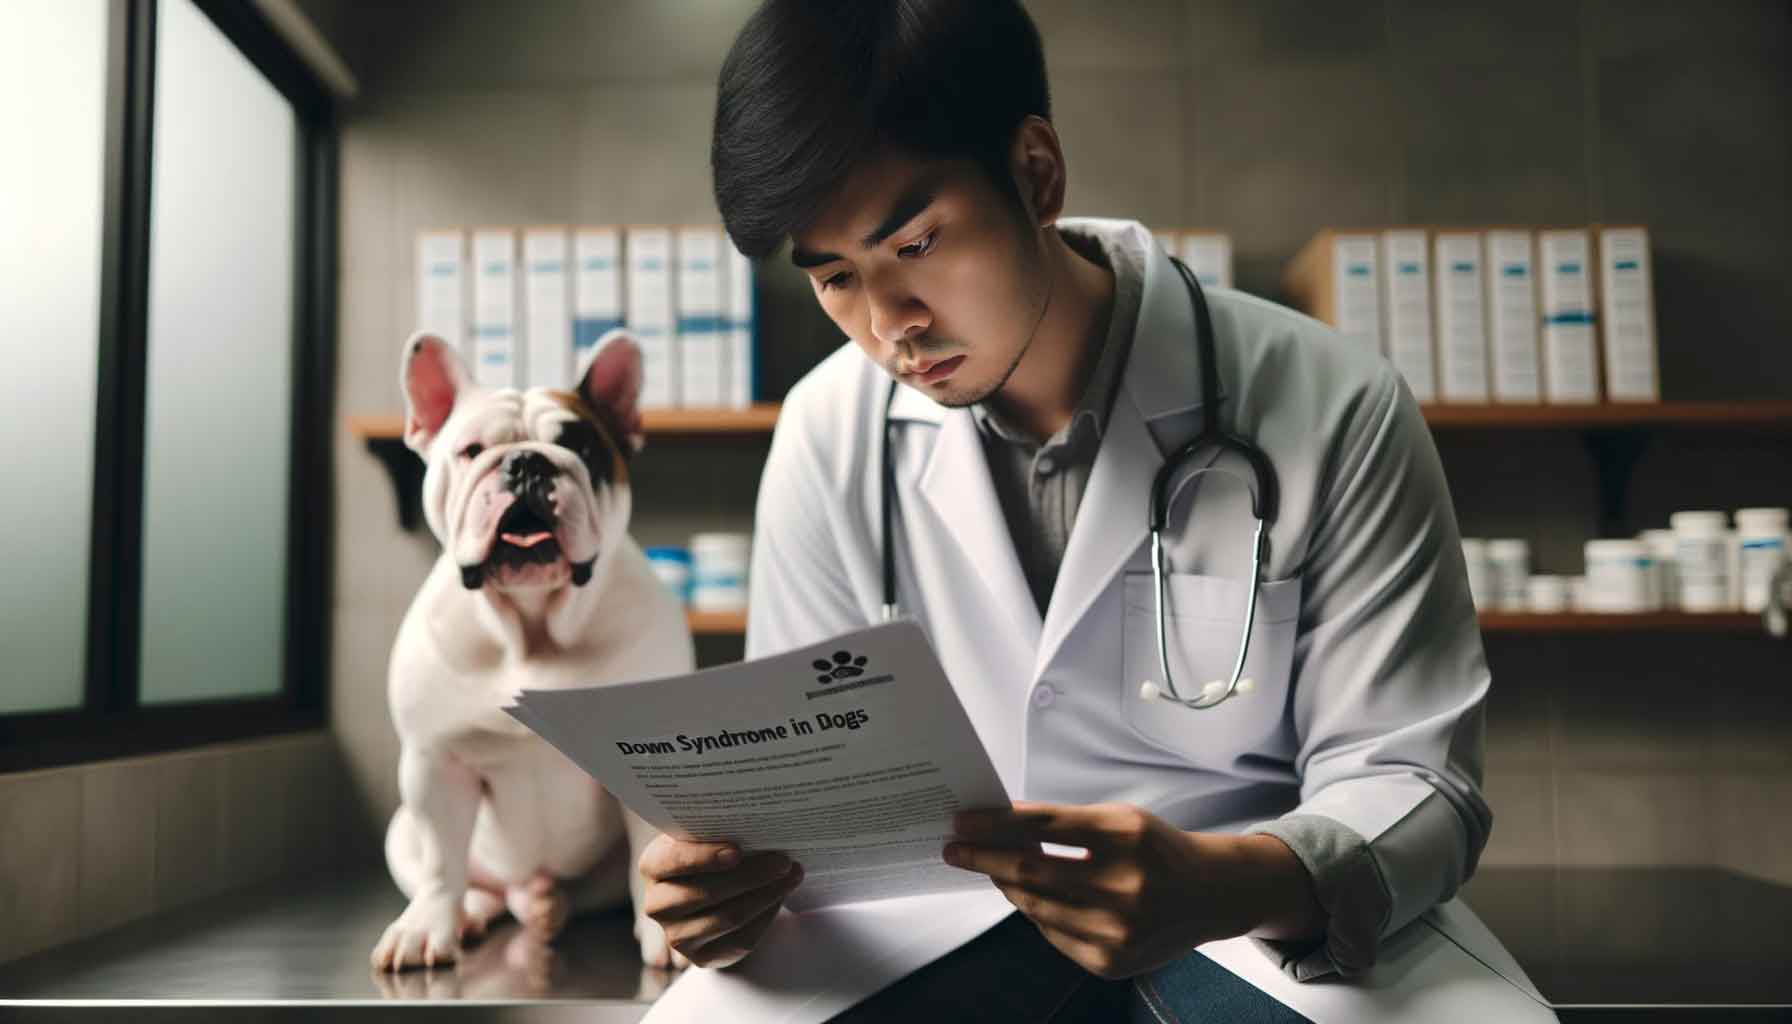 A photograph of an introspective veterinarian, an Asian male, with glasses, deeply engrossed in an informational paper about 'Down Syndrome in Dogs'.